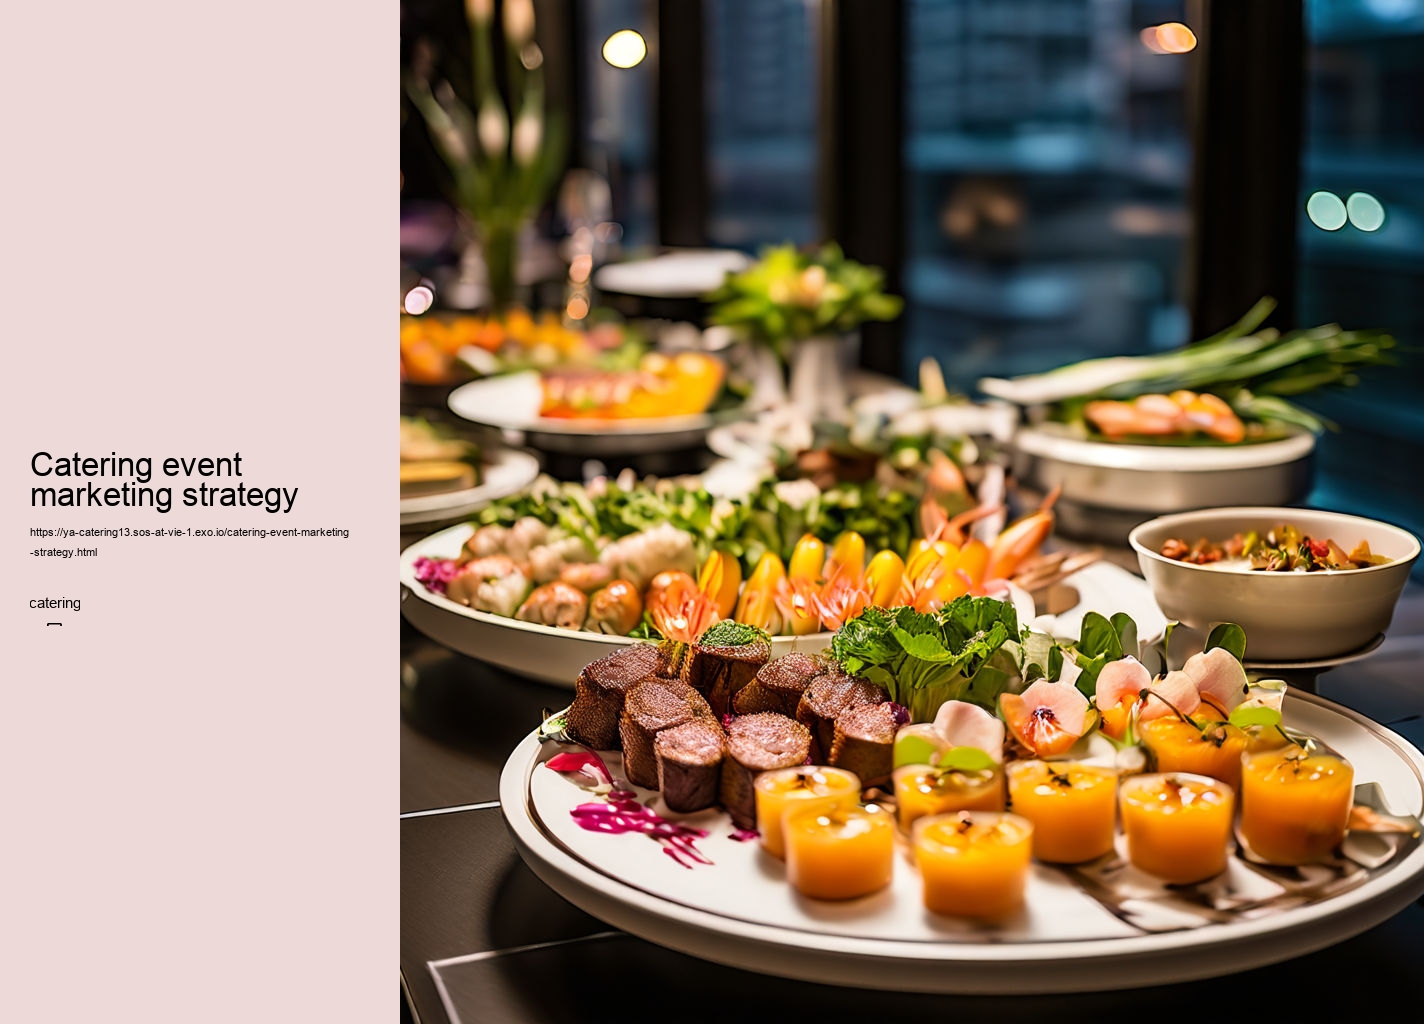 Catering event marketing strategy